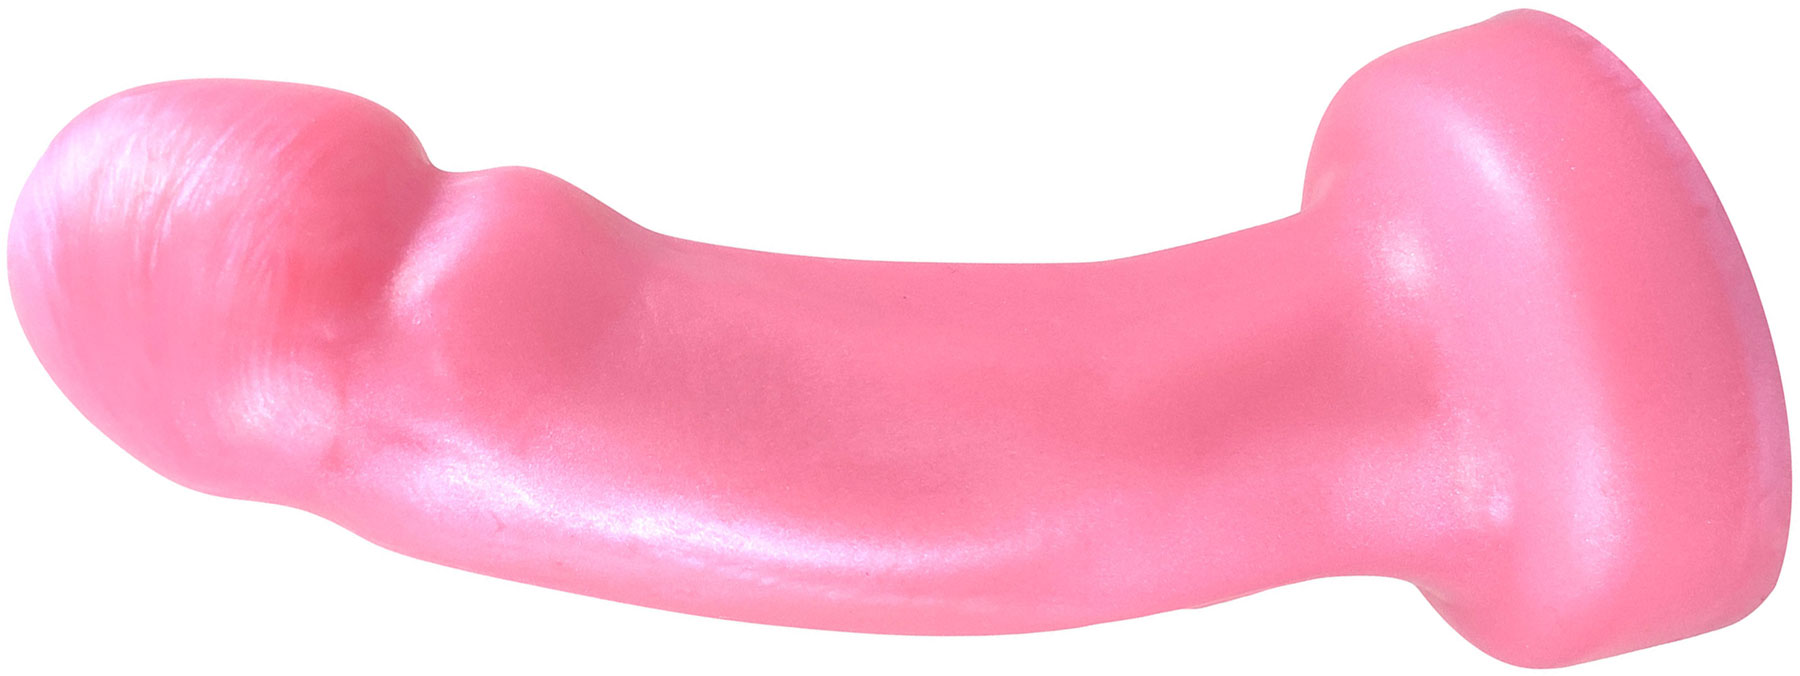 Splendid Dual-Density Silicone Dildo By Uberrime - Small, Pearl Pink